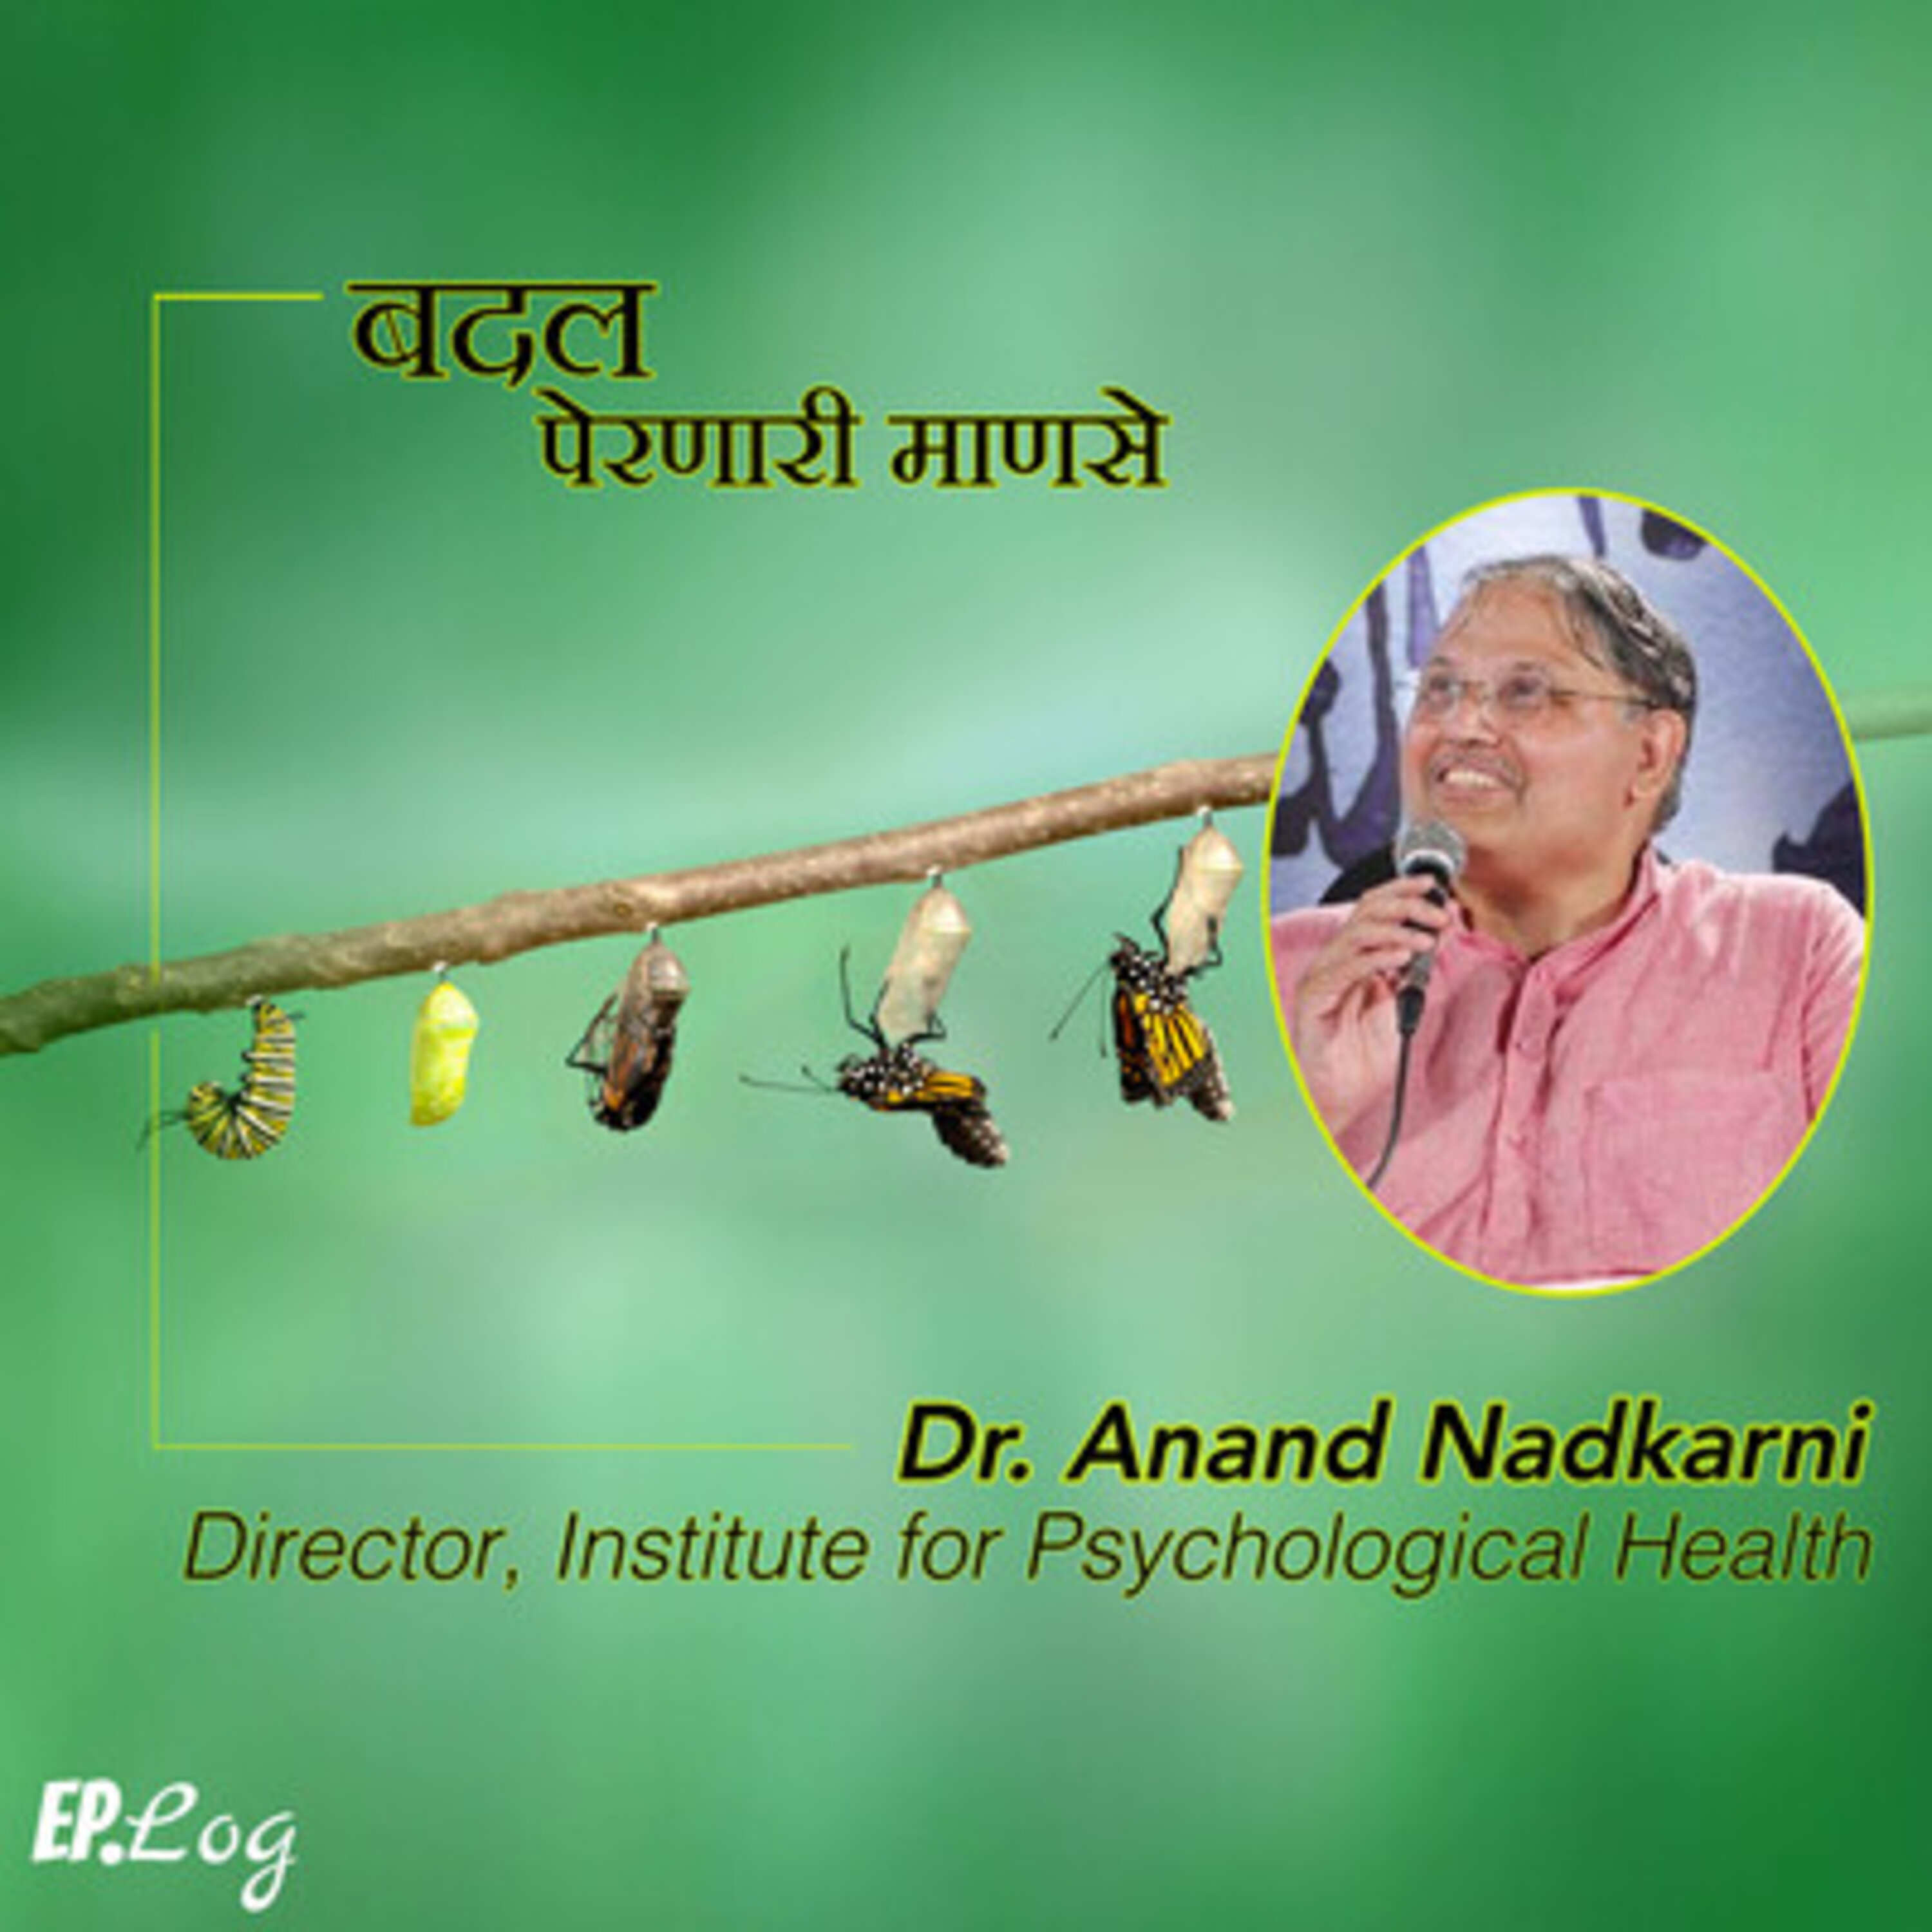 ep-6-bringing-creativity-and-social-change-together-ft-dr-anand-nadkarni-director-institute